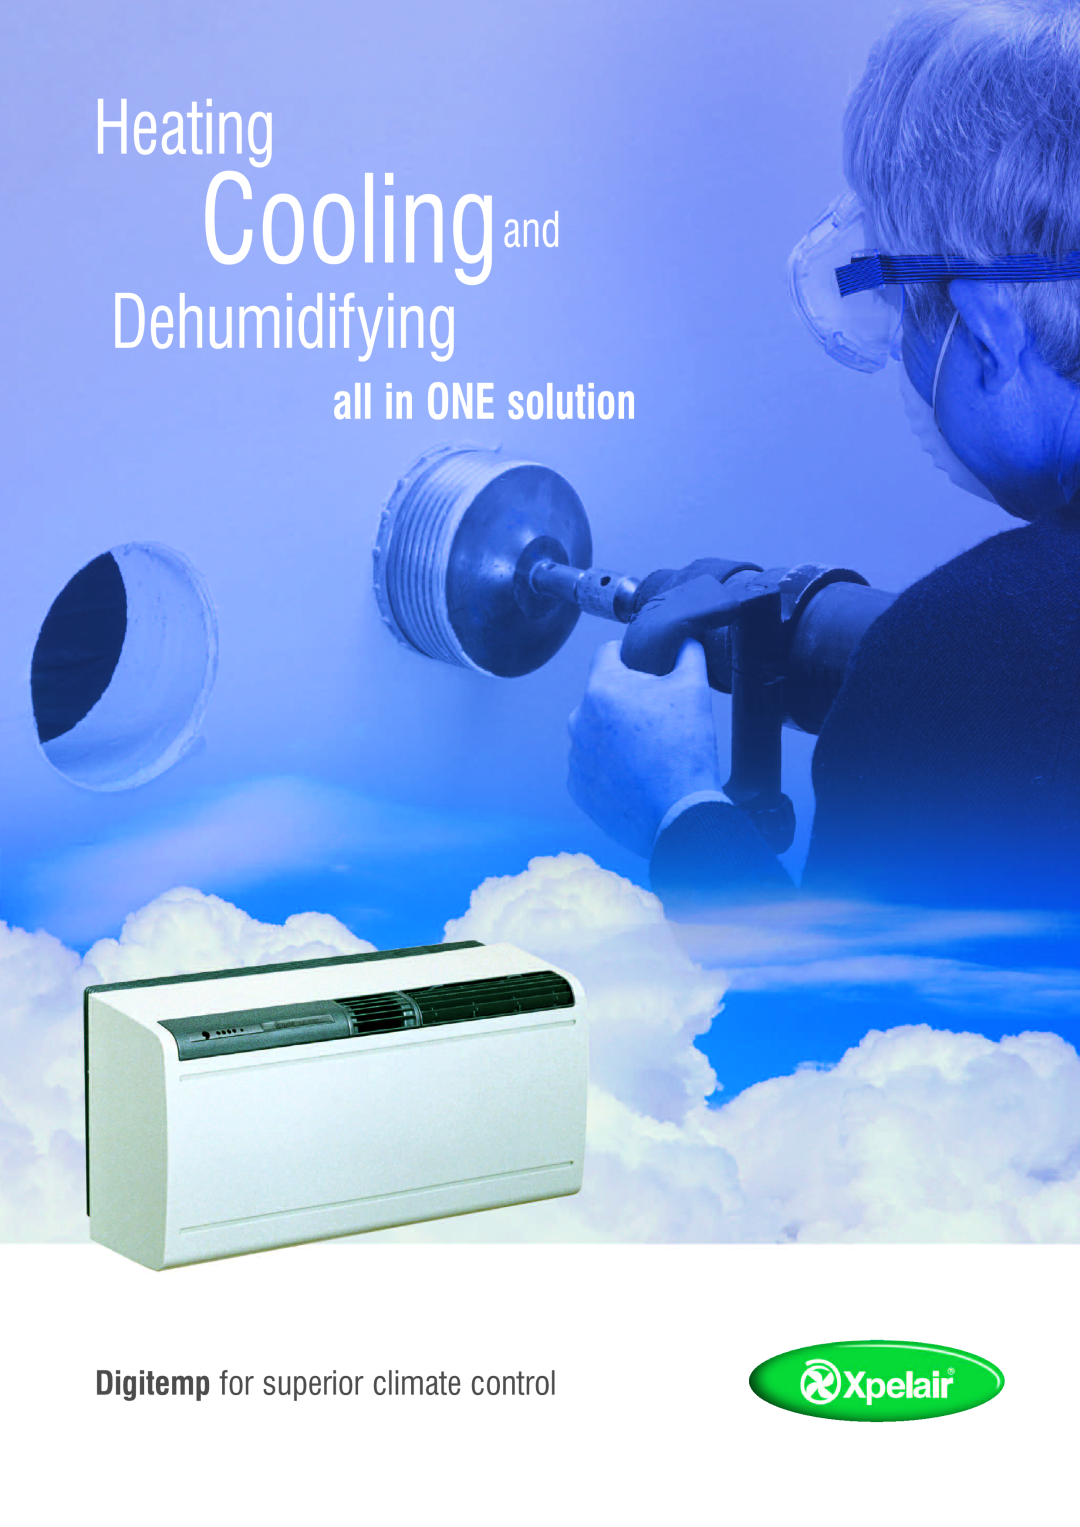 Xpelair manual Coolingand, Heating, Dehumidifying, all in ONE solution, Digitemp for superior climate control 